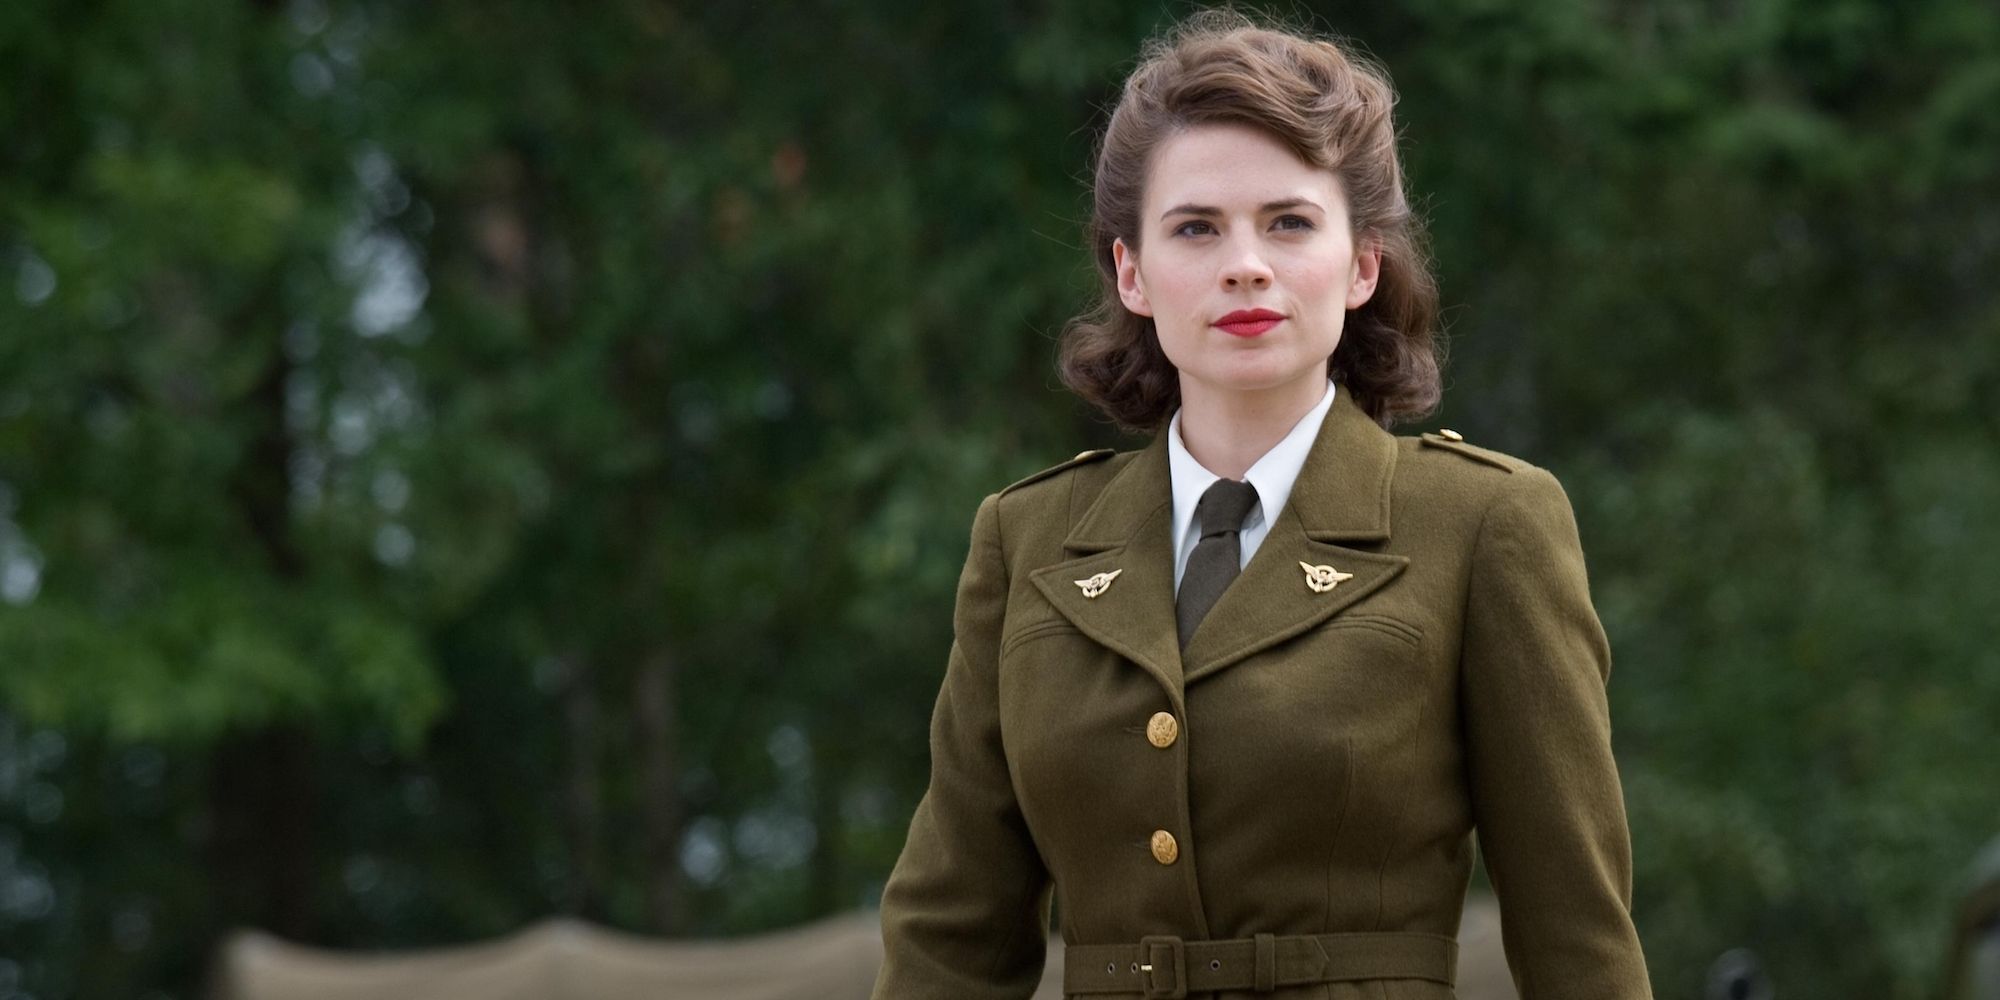 Agent Peggy Carter in Captain America